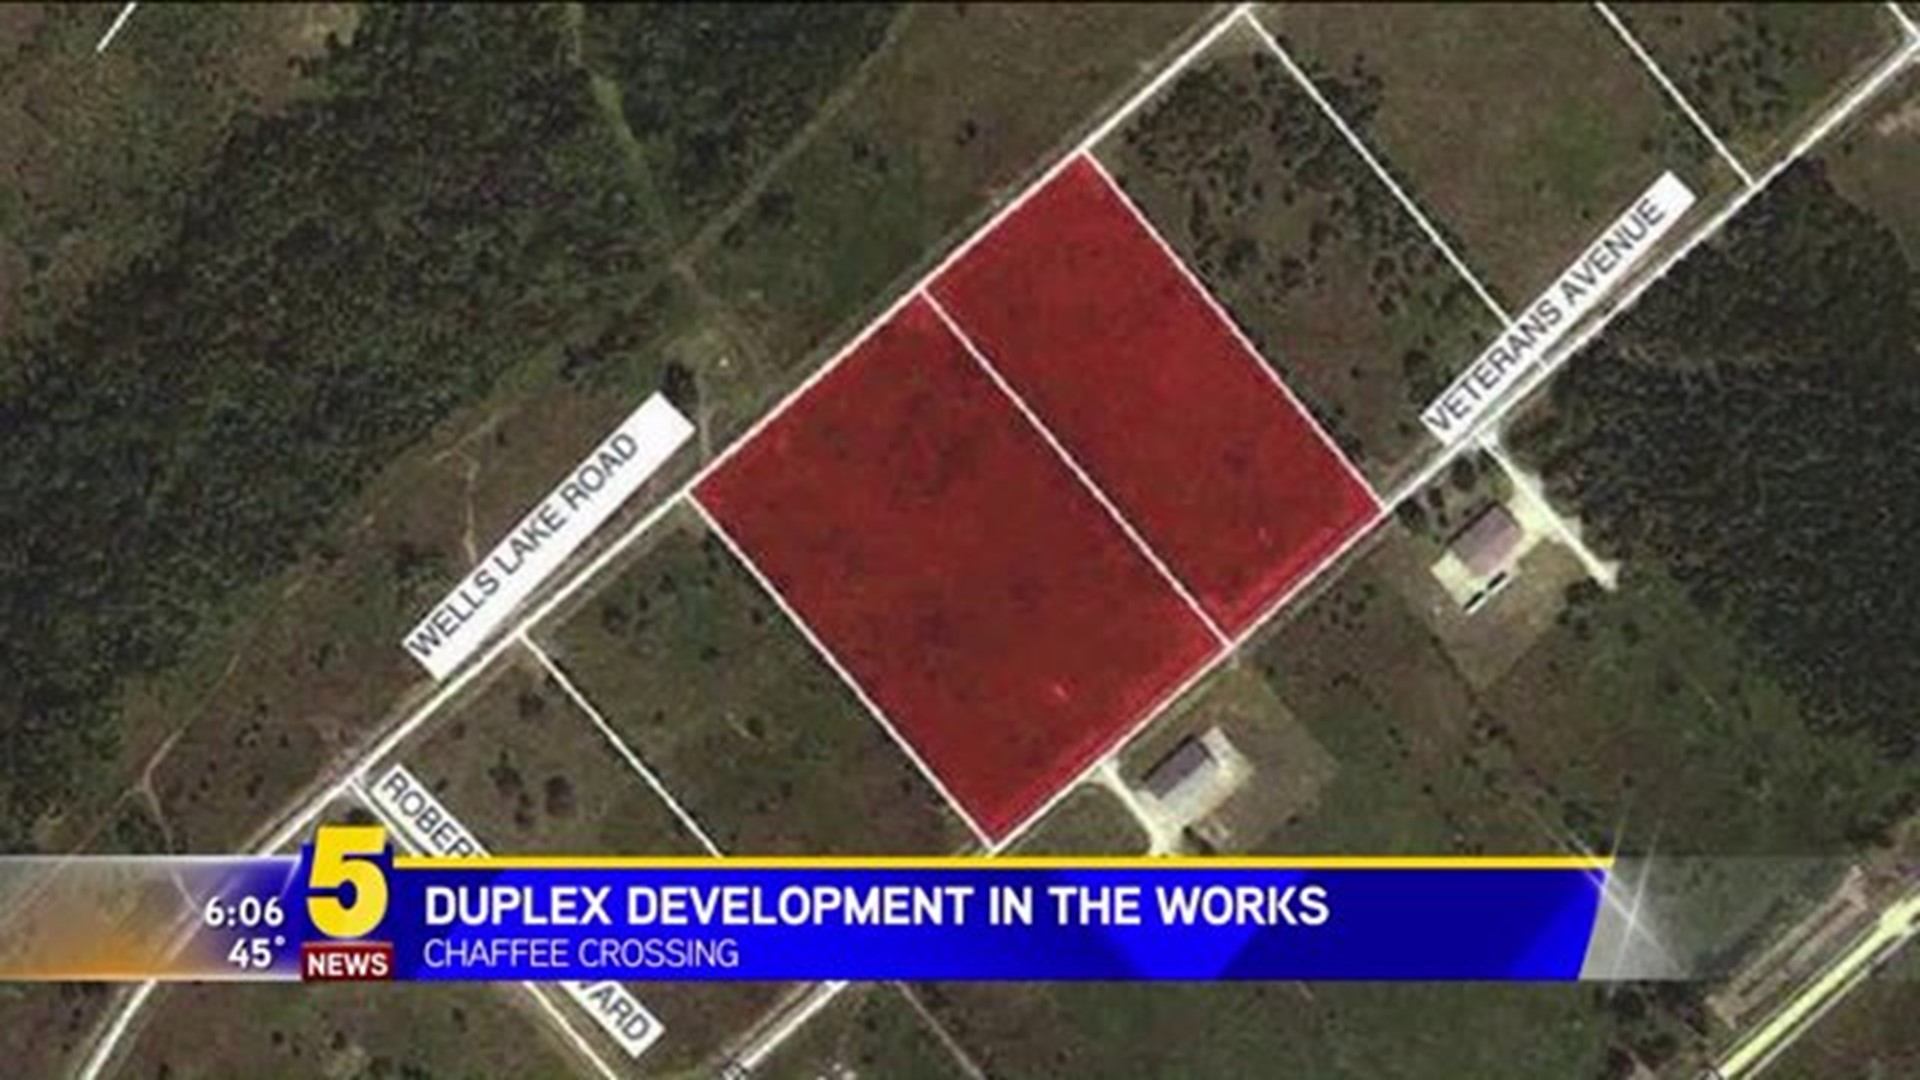 Duplex Development In The Works At Chaffee Crossing